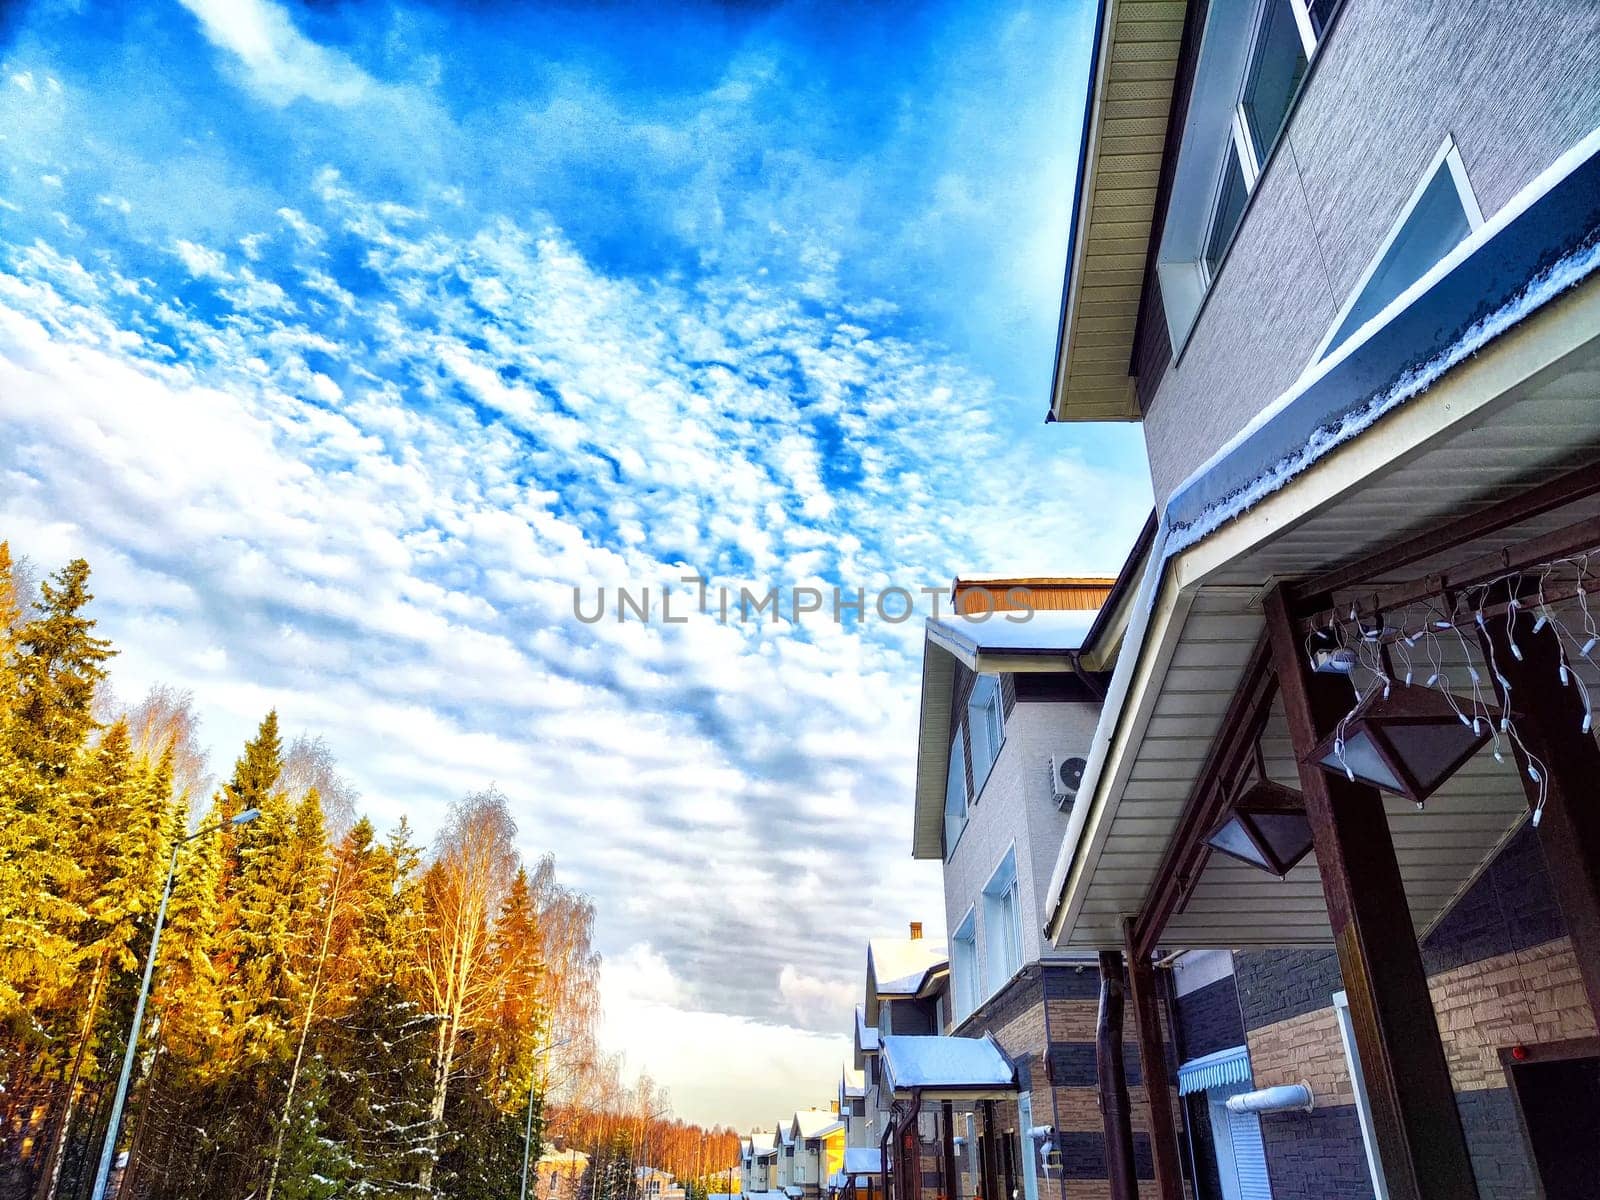 Suburban Street View With Striking Clouds at Dusk. Residential houses under a vibrant evening sky with textured clouds by keleny